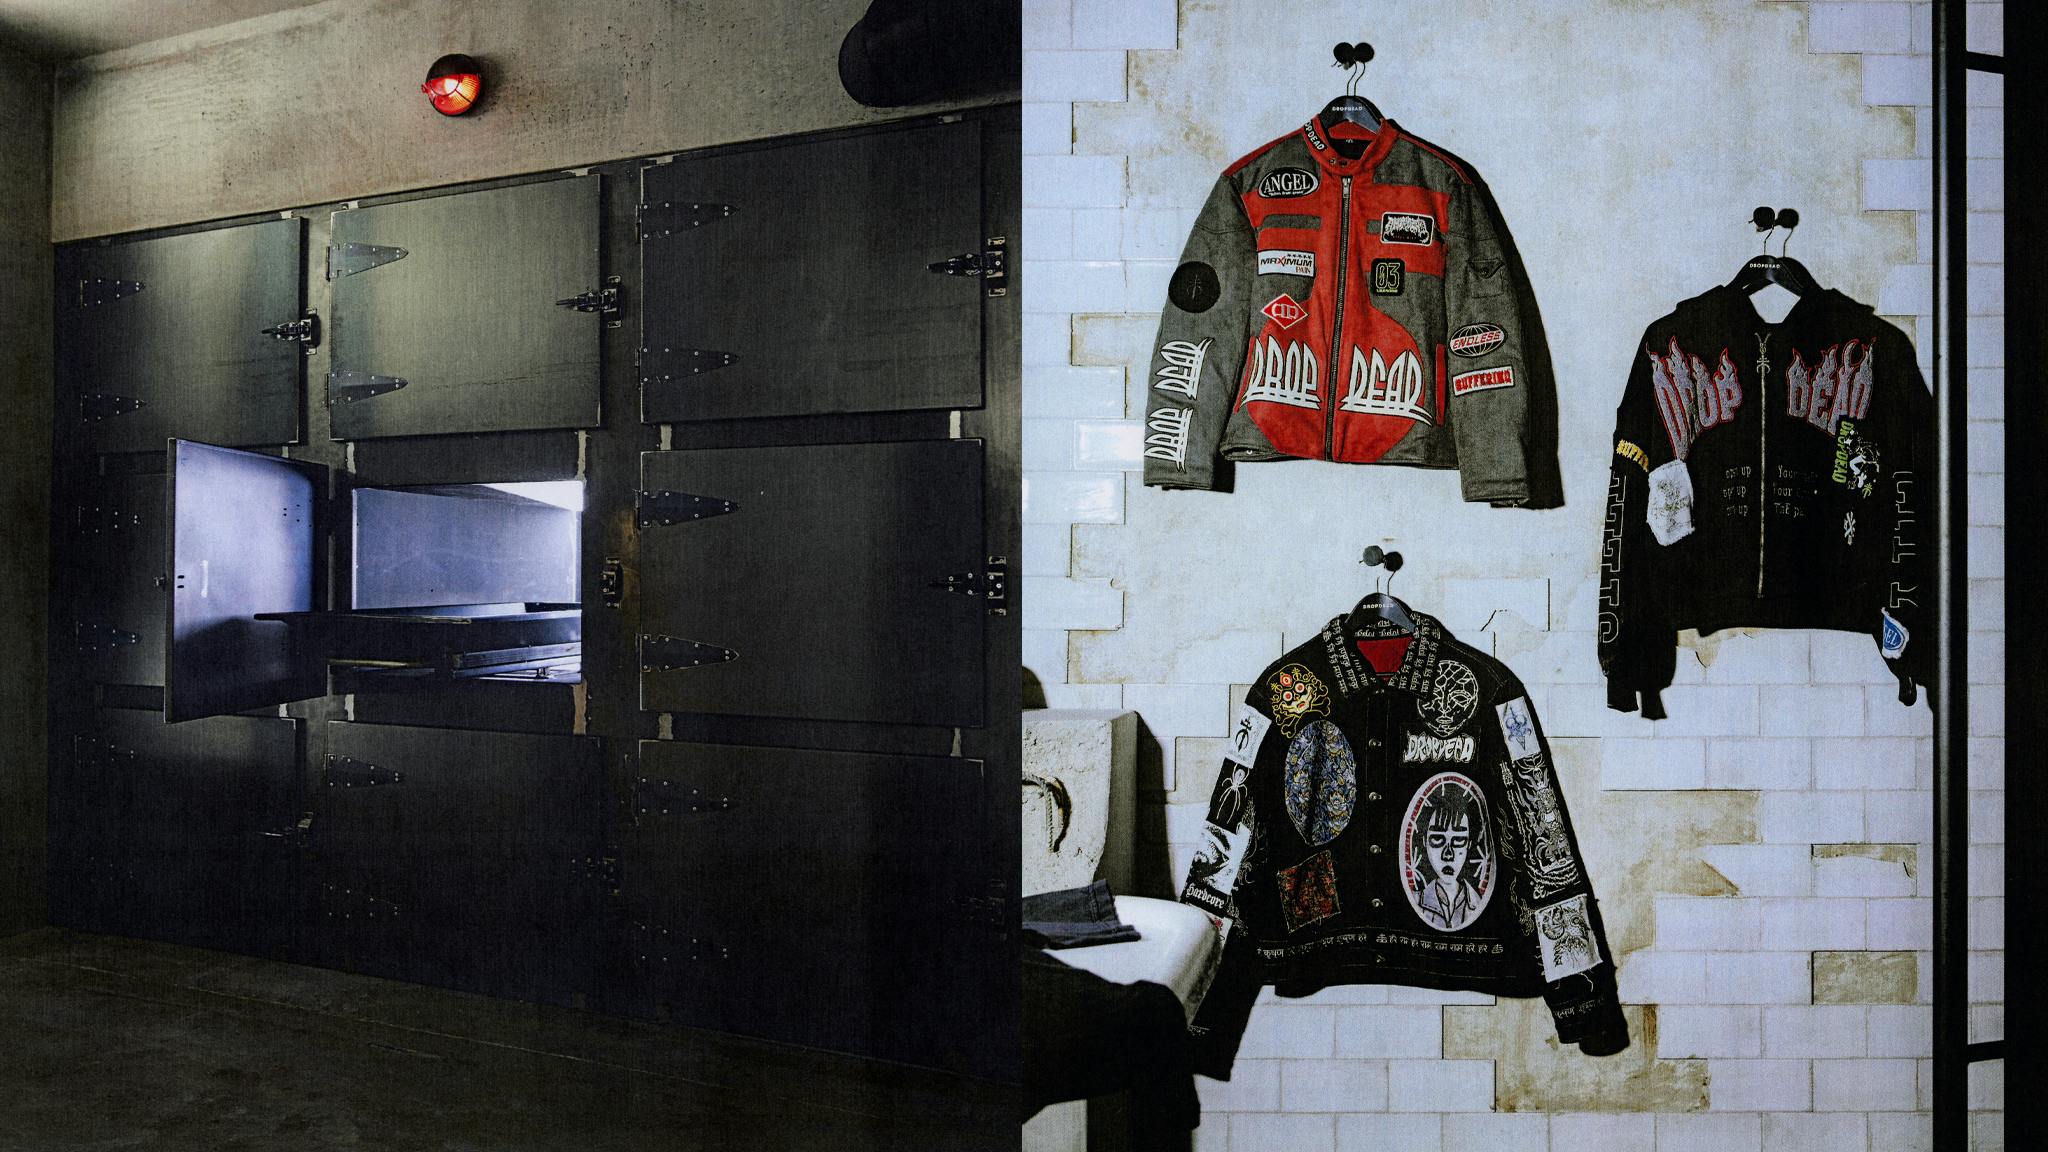 Drop Dead are unveiling a “morgue-inspired” immersive showroom